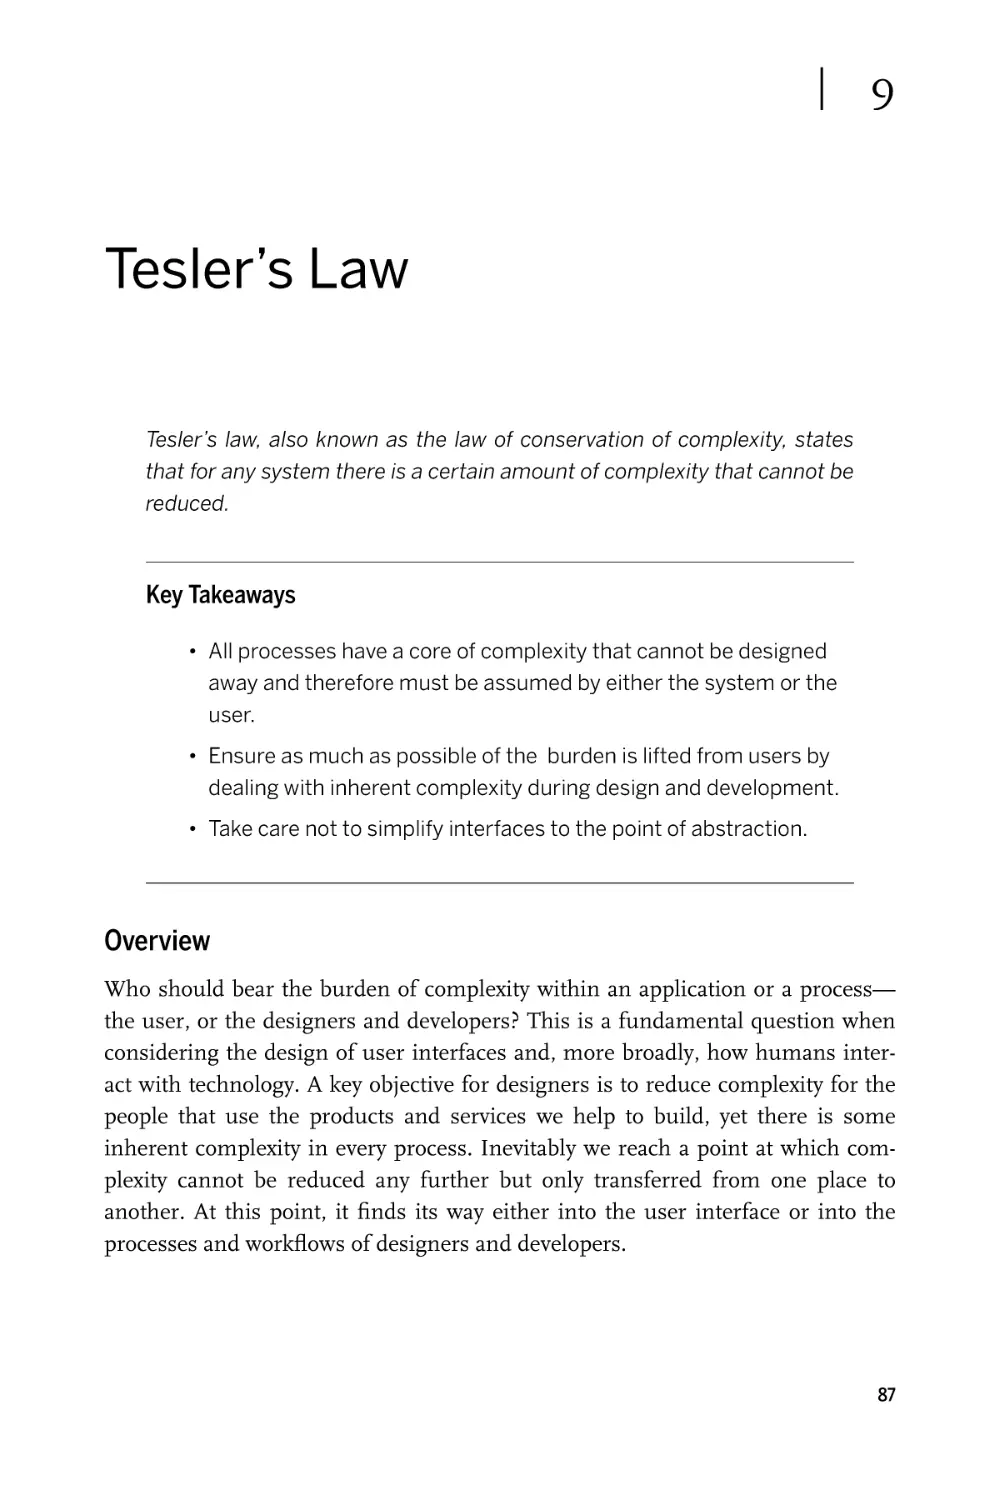 Chapter 9. Tesler’s Law
Overview